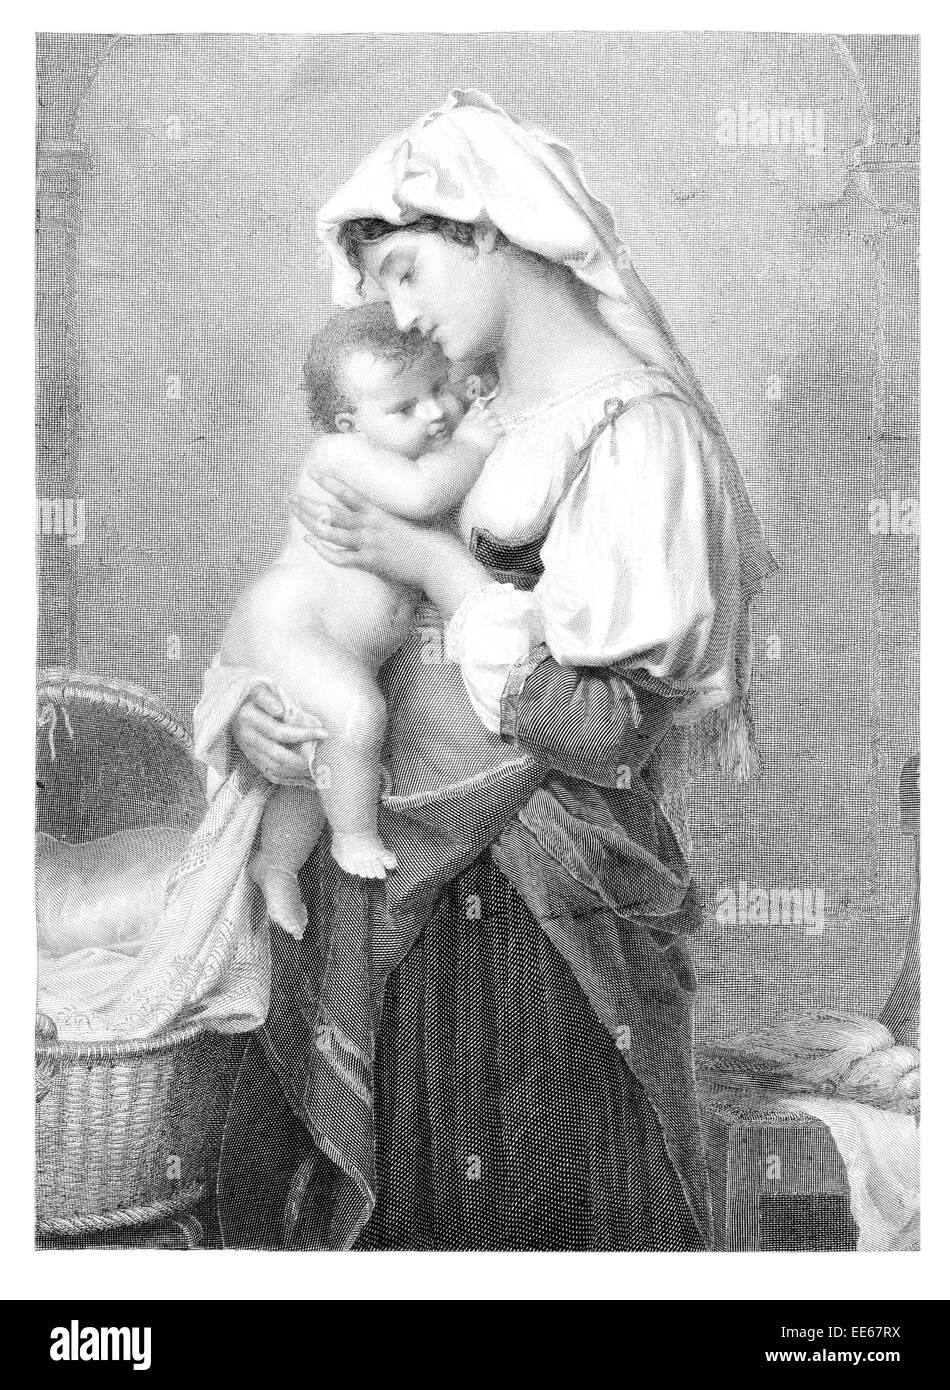 The First Hope Charles François Jalabert new born baby child infant birth pregnancy mother cot period costume Stock Photo